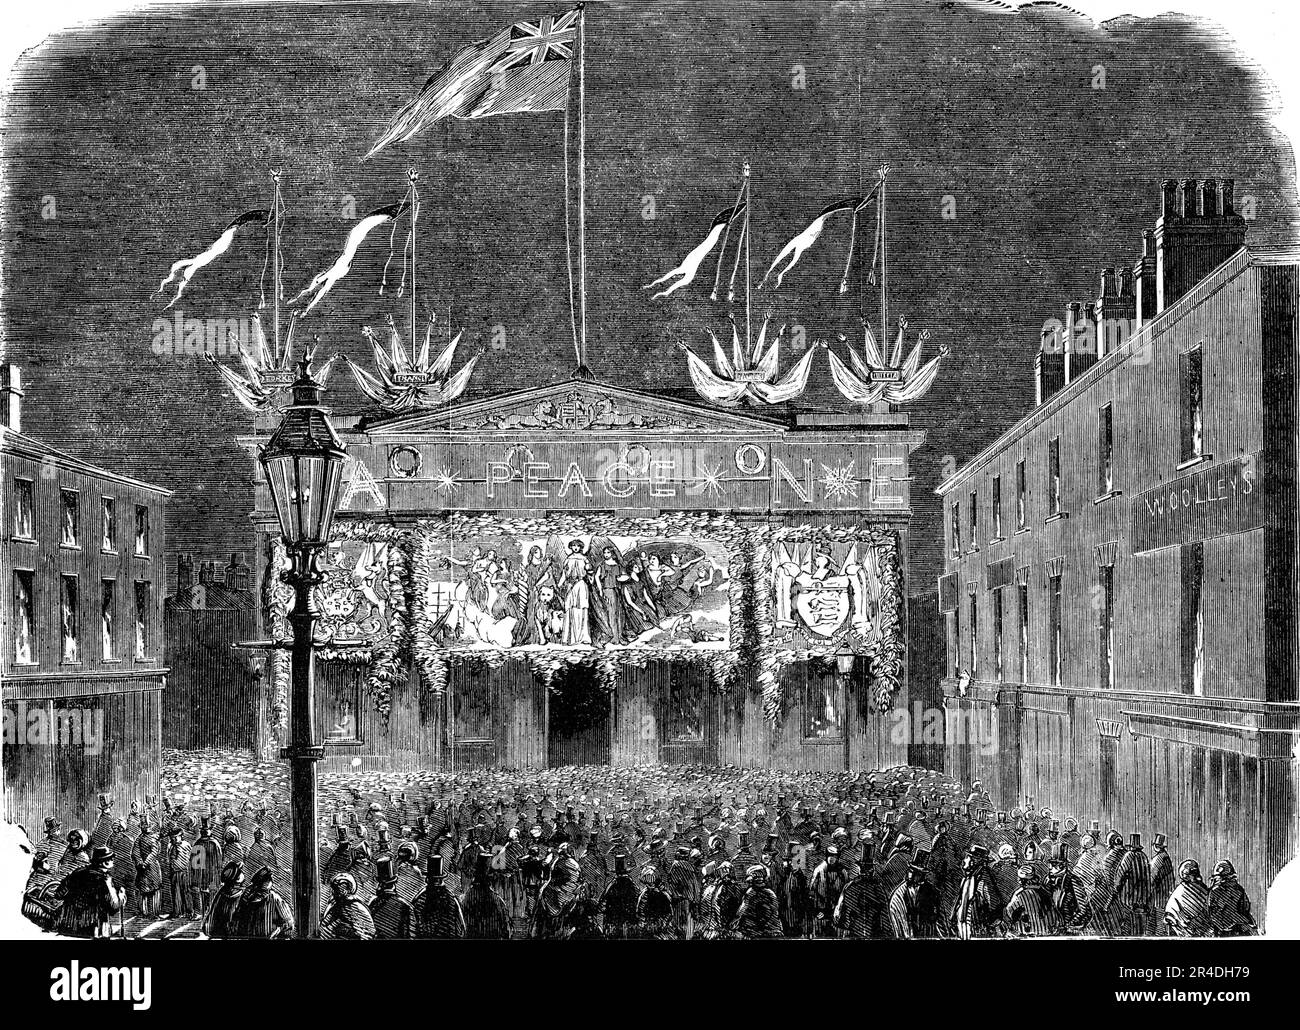 The Peace Commemoration at Salford - the Townhall, 1856. Celebrating the end of the Crimean War - crowds marvel at a '...painting, 36 ft. by 14 ft....In its centre stands Peace...All the figures are well drawn, the drapery being painted in light and brilliant colours for the purpose of showing well by gaslight...upon the frieze &quot;Peace&quot; is displayed in large letters formed by gas jets...[with] the initials &quot;V.A.&quot; and &quot;N.E.&quot; all in large letters, and lighted by gas...The paintings were designed and executed by Mr. H. C. Whaite...The gas devices and arrangements...we Stock Photo